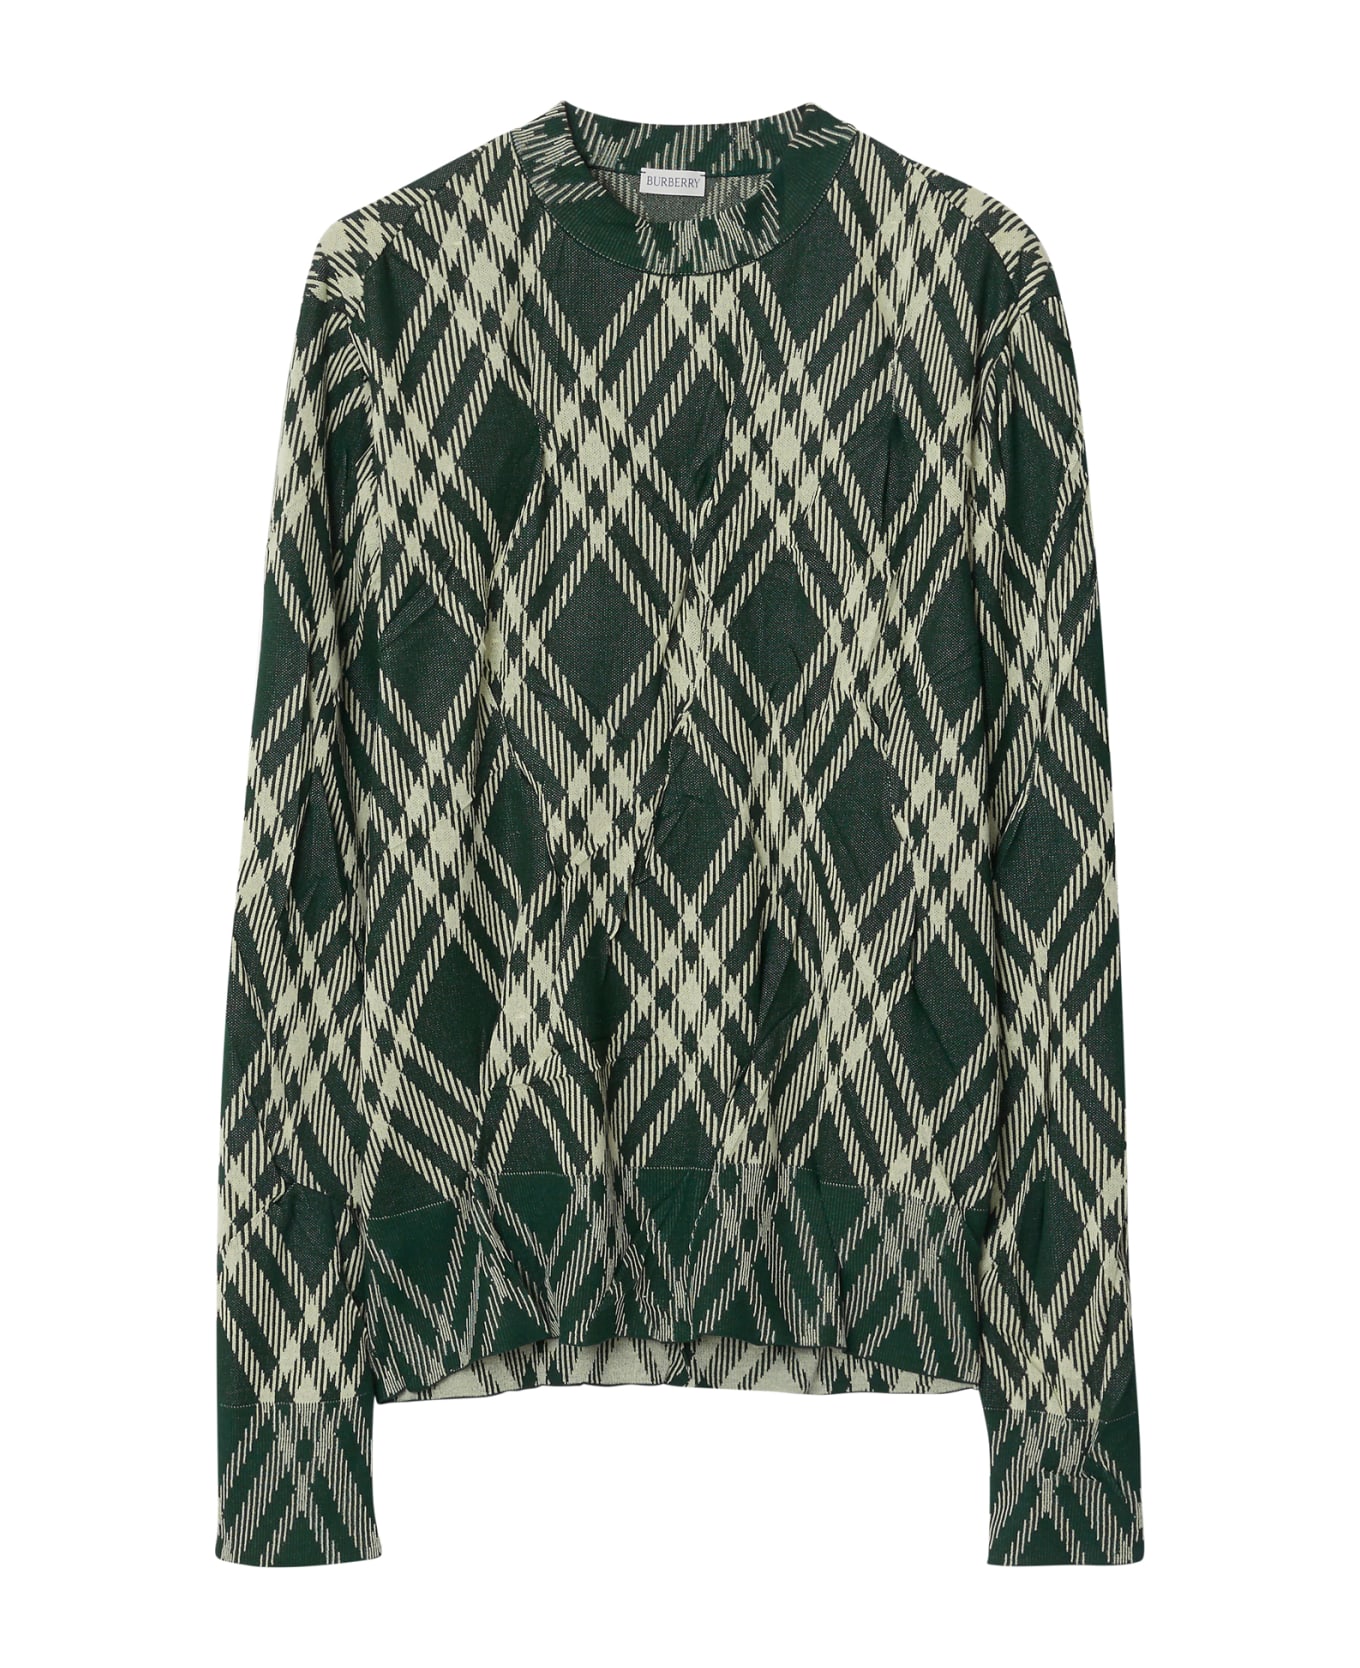 Burberry Plaid-check Crinkled-effect Crewneck Jumper - Ivy Ip Check